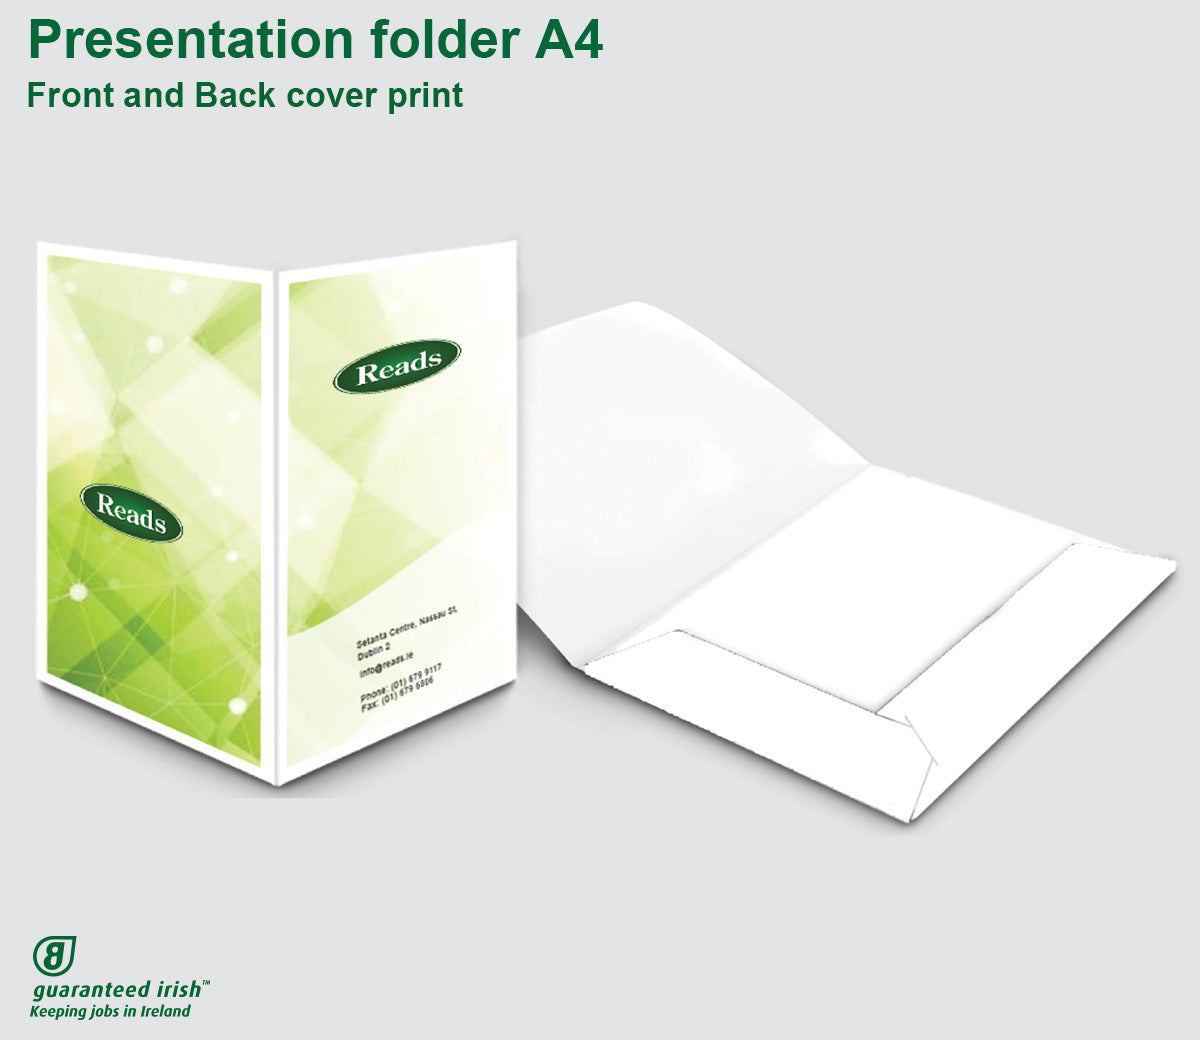 Presentation folder A4 - Front and Back cover print